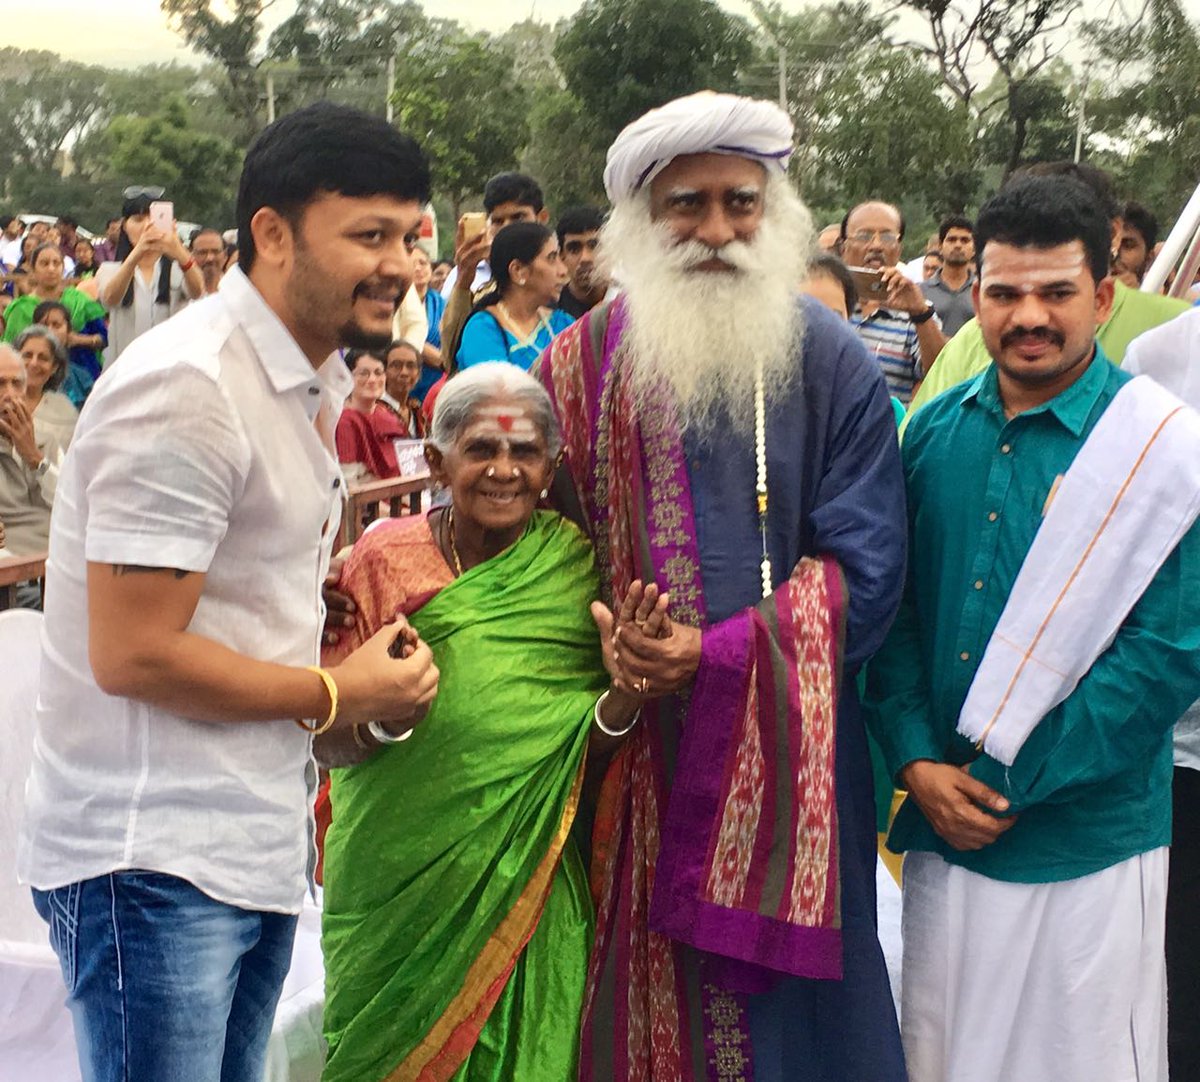 Saalumarada Thimmakka seen here with mystic, spiritual teacher and outspoken environmental activist, Sadhguru. Sadhguru is currently an advisor to the government on agricultural and forestry matters.